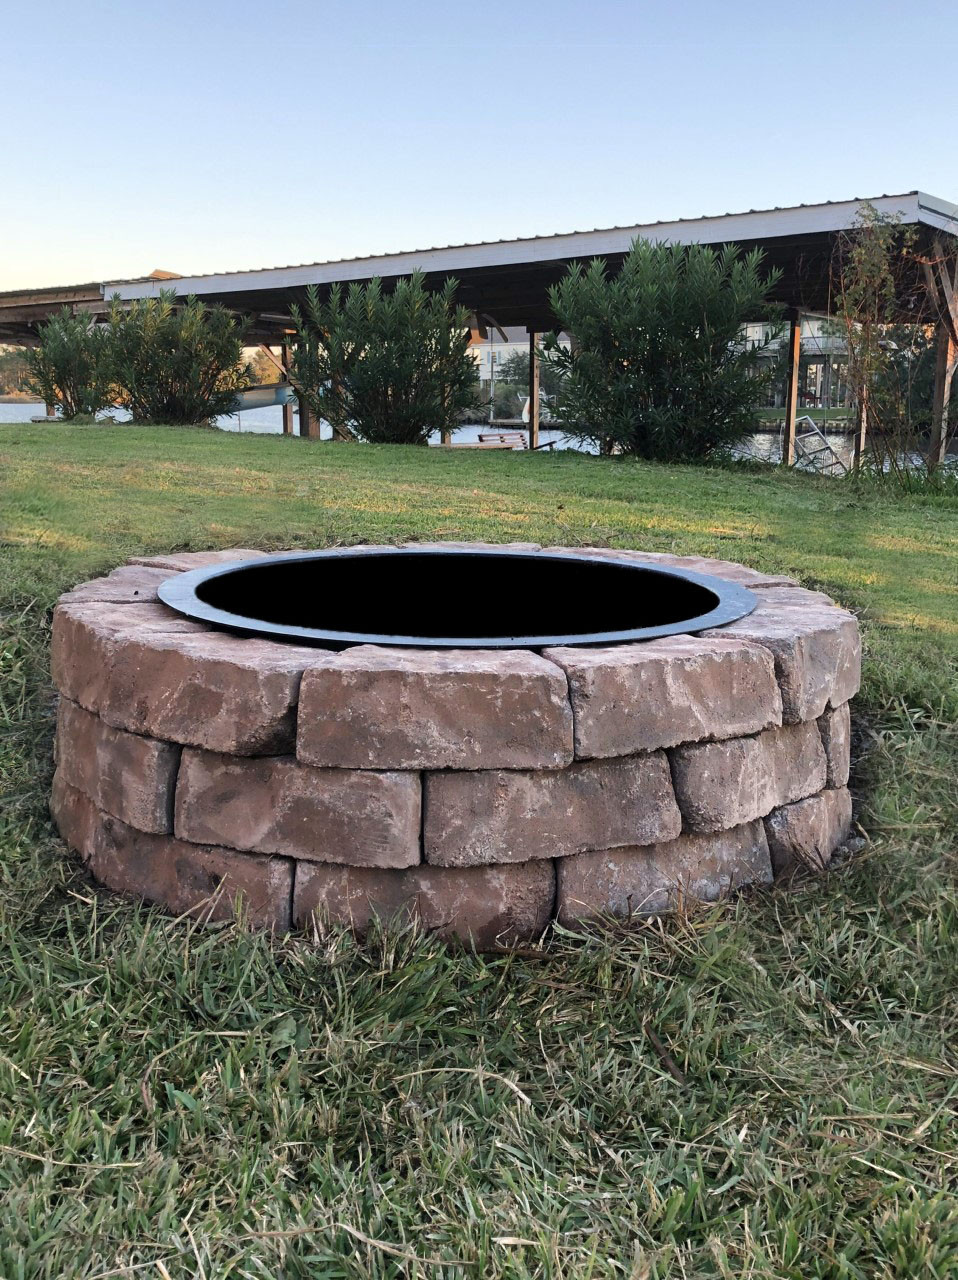 DIY Fire Pit Kits
 Installing Our Own DIY Stone Fire Pit Belgard s Ashland